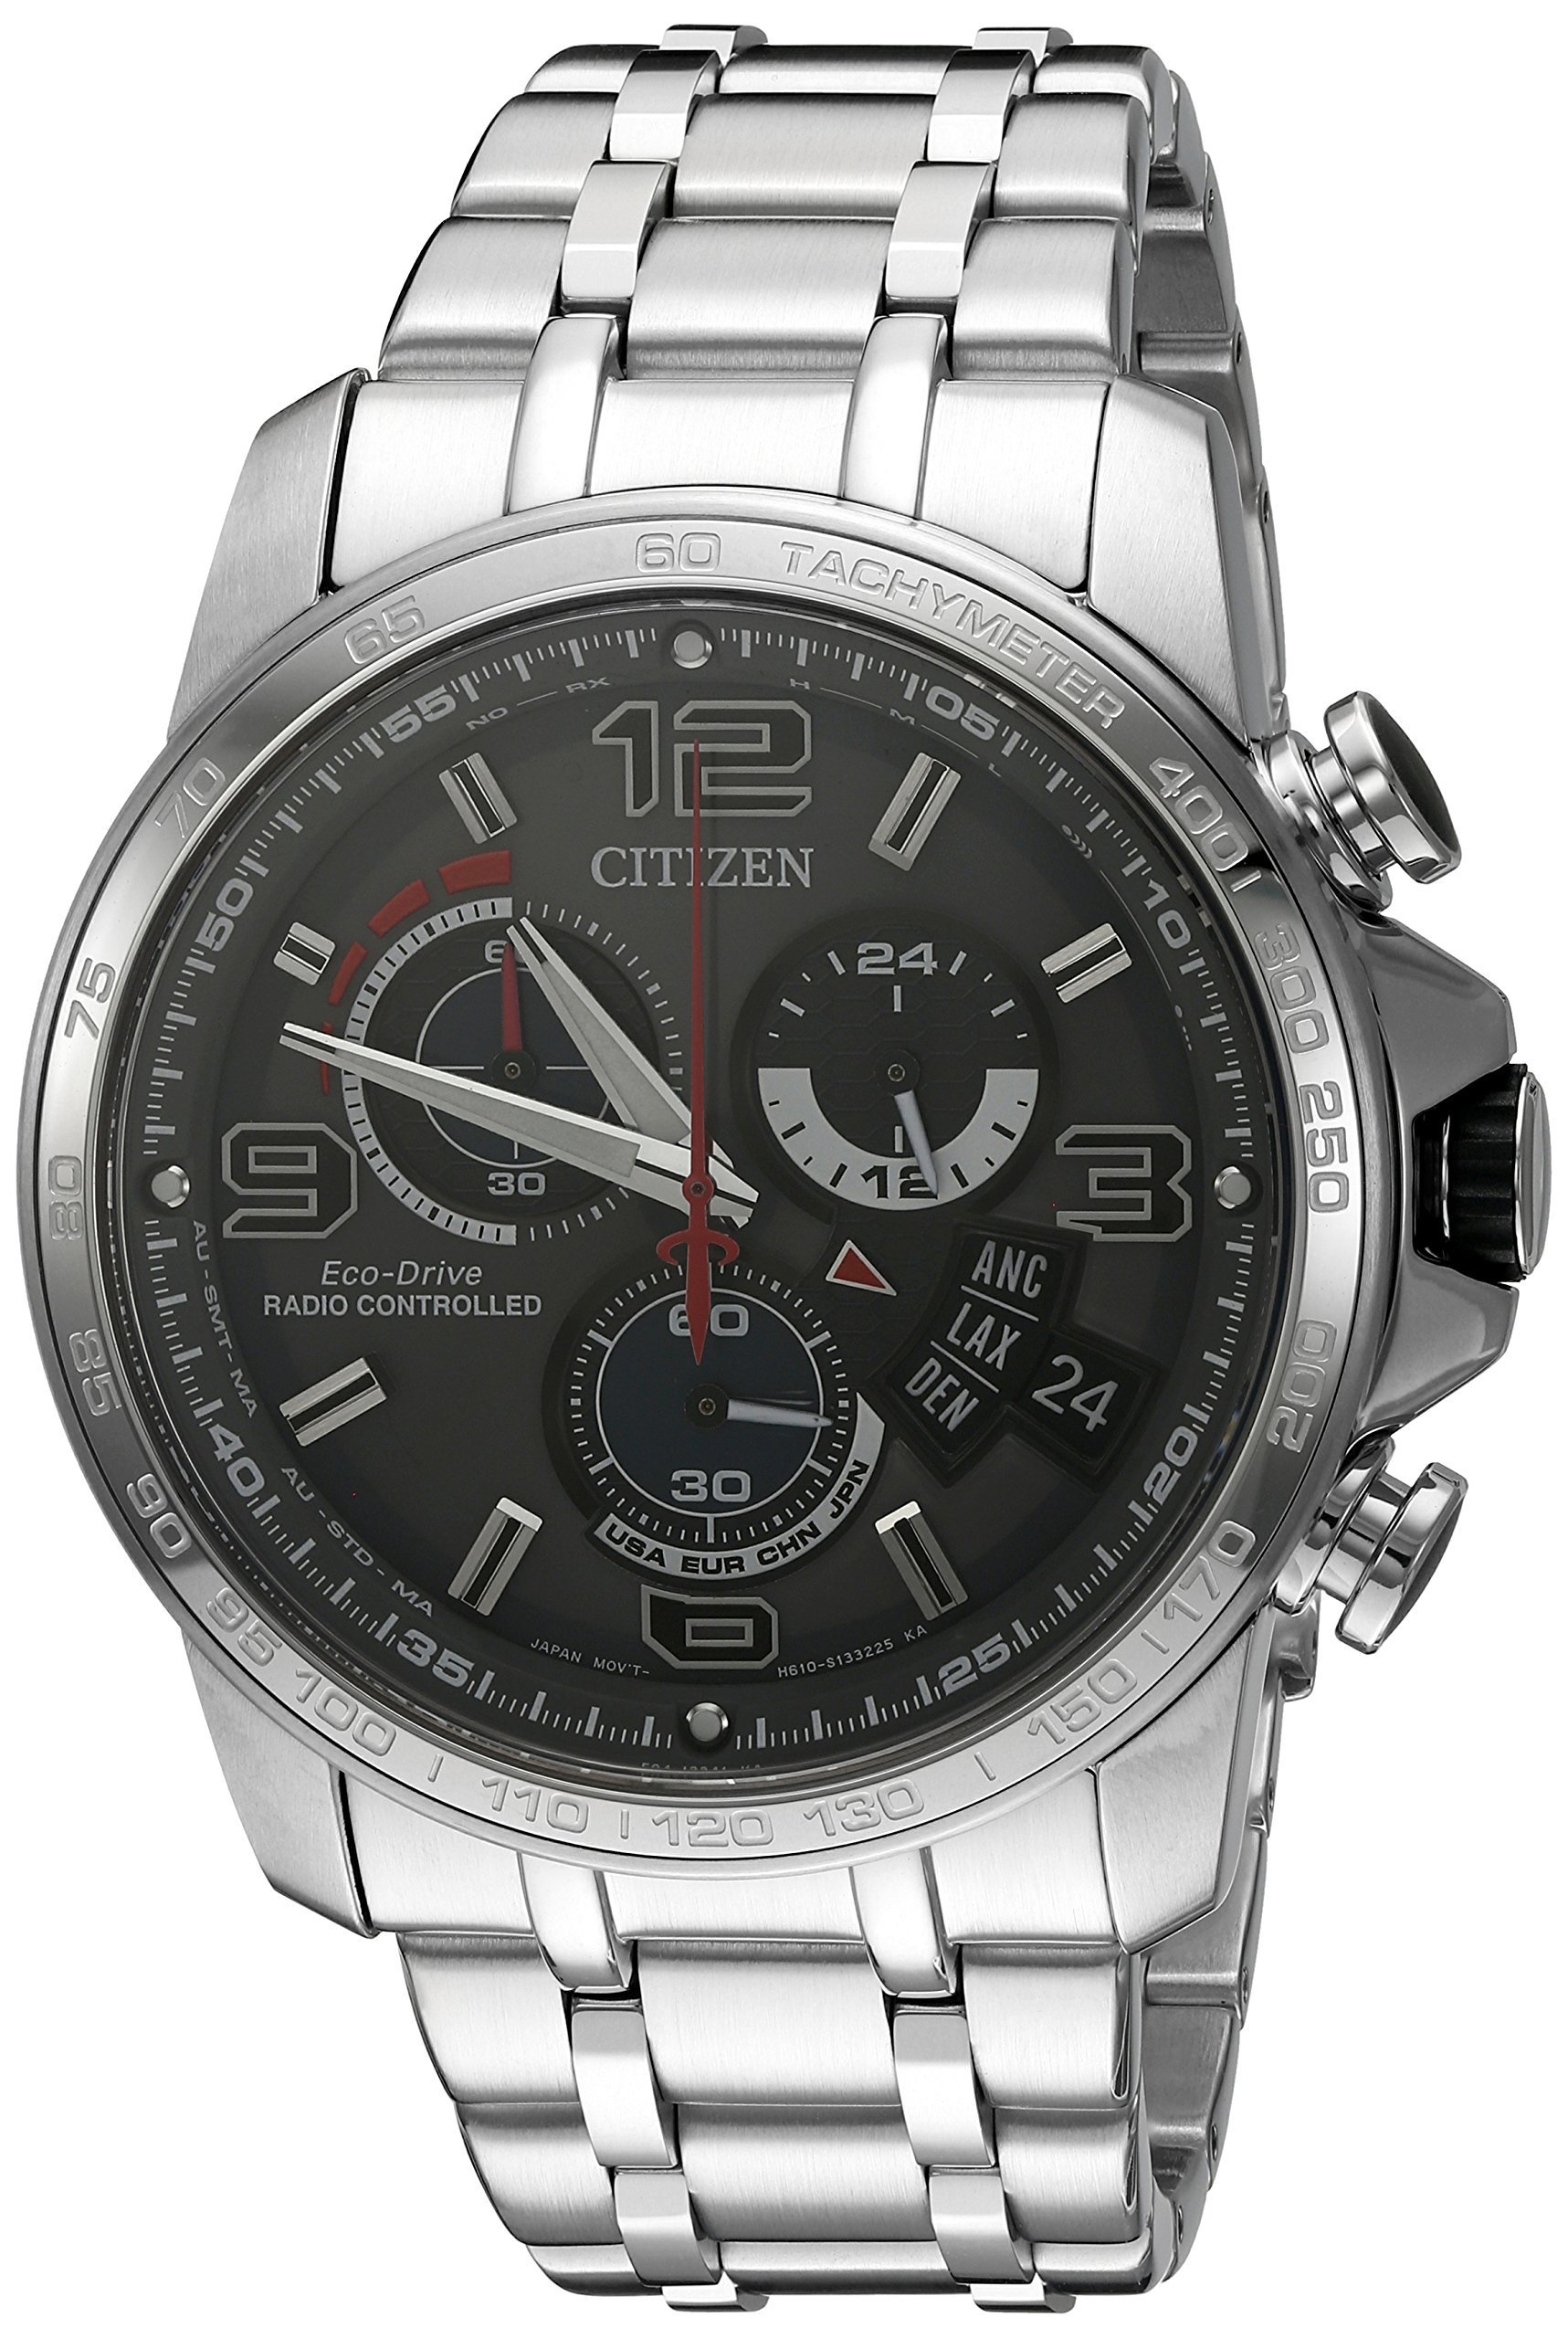 Citizen Chrono Time AT Stainless Steel Mens Watch BY0100-51H